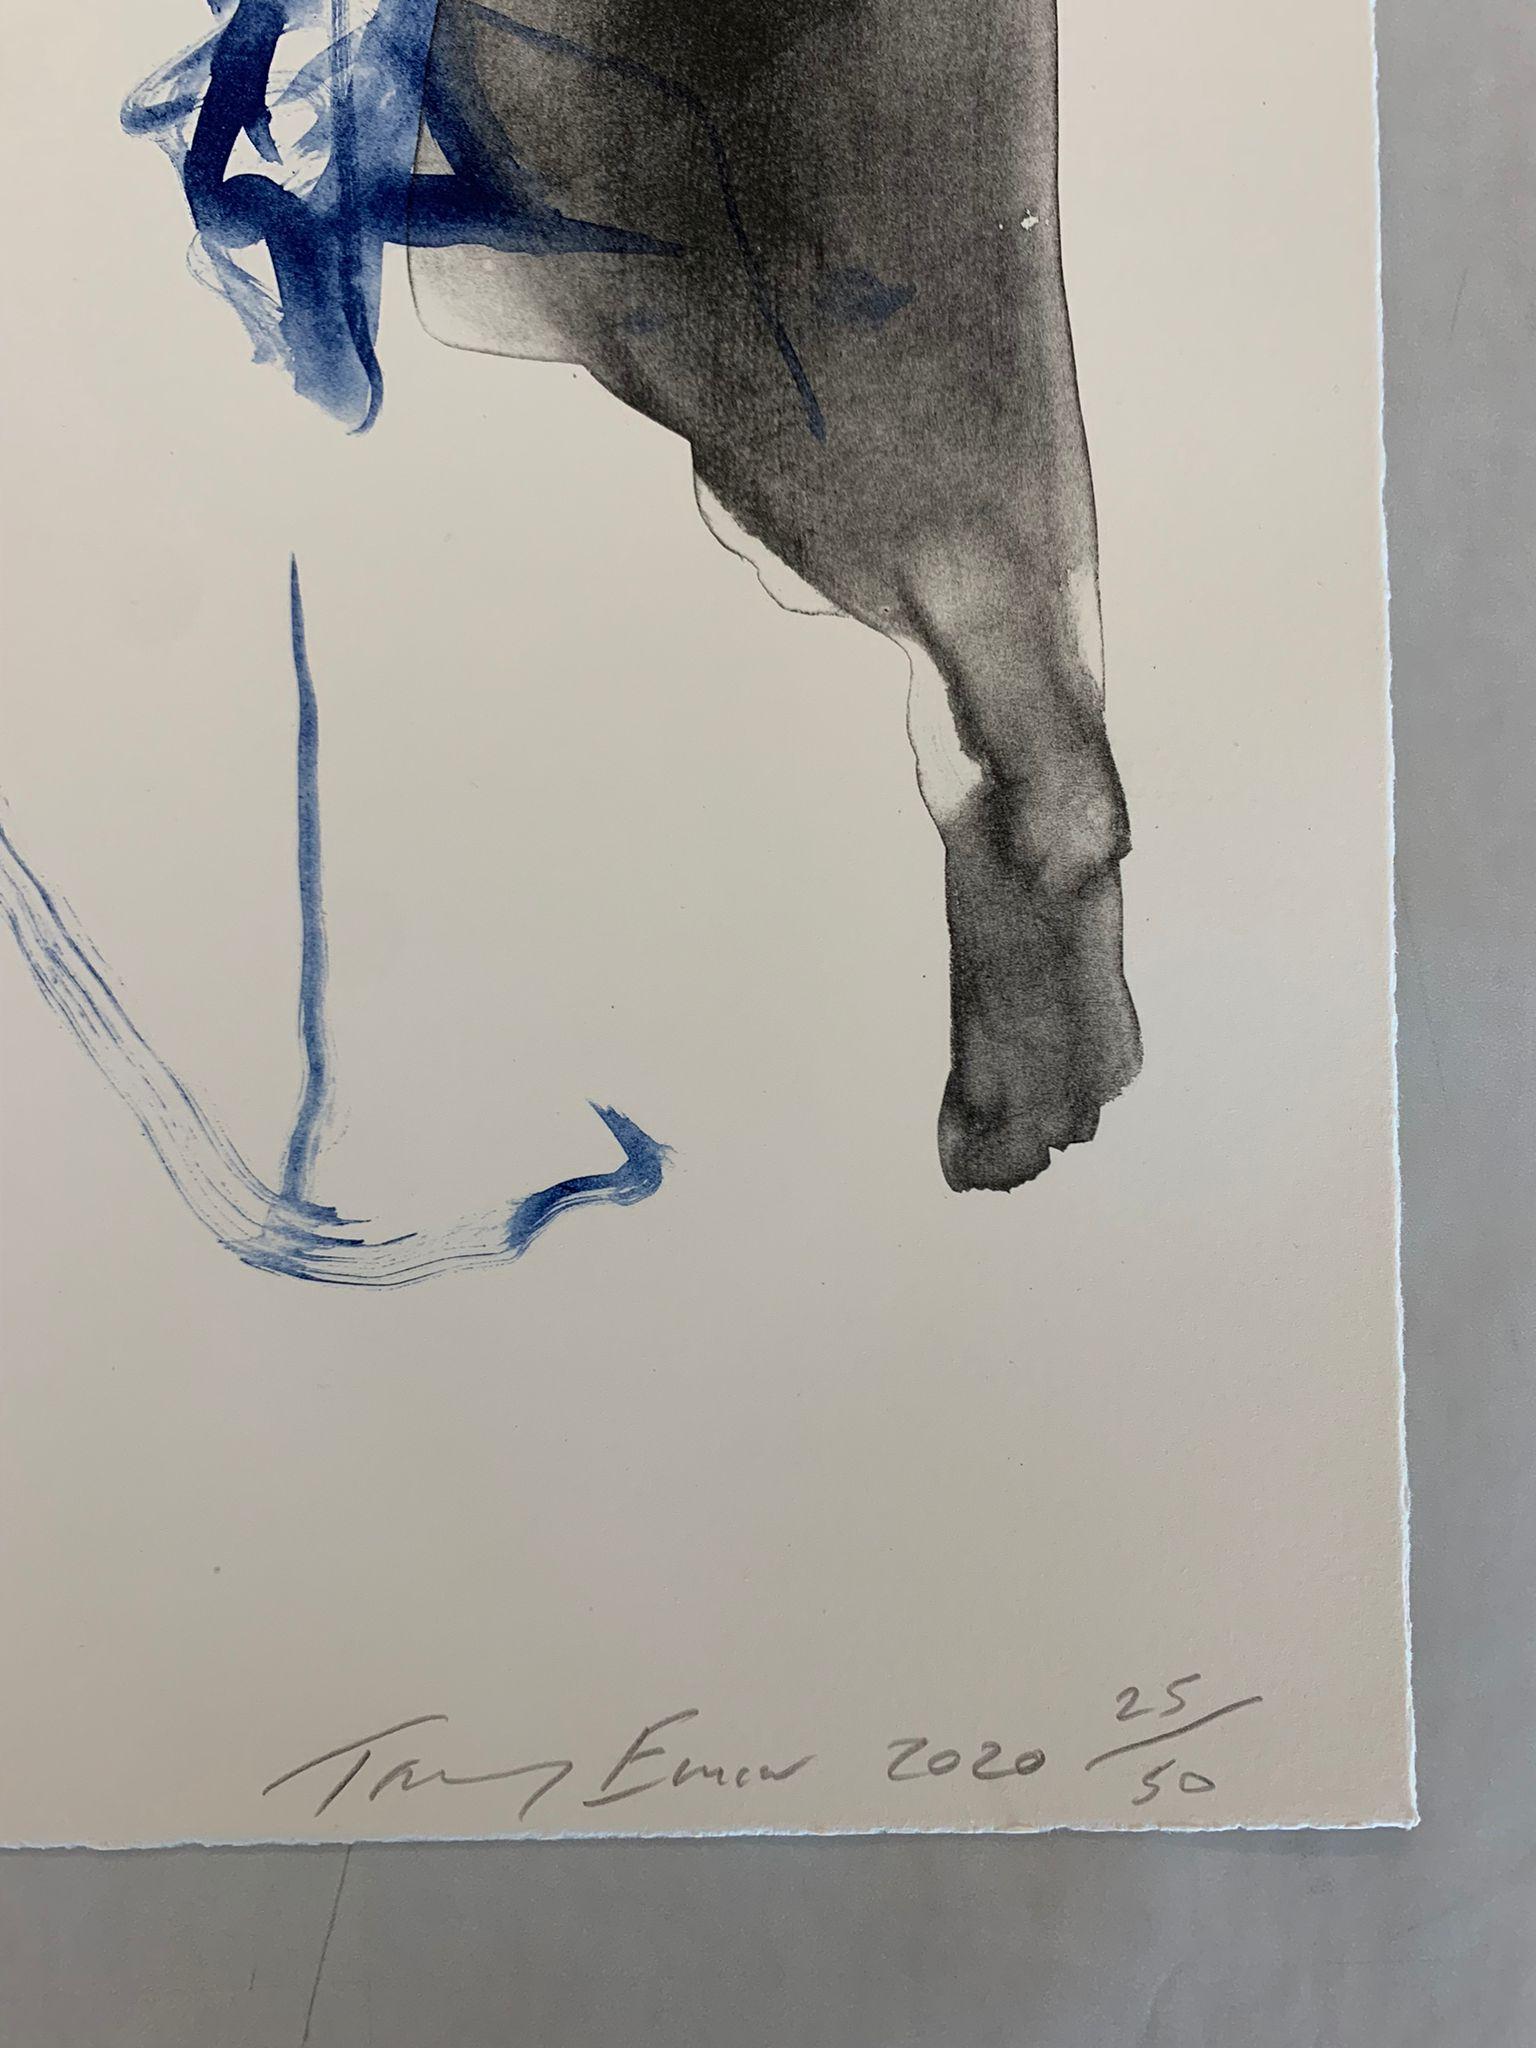 These Feelings Were True -Emin, Contemporary, YBAs, Lithograph, Blue, Portrait For Sale 13